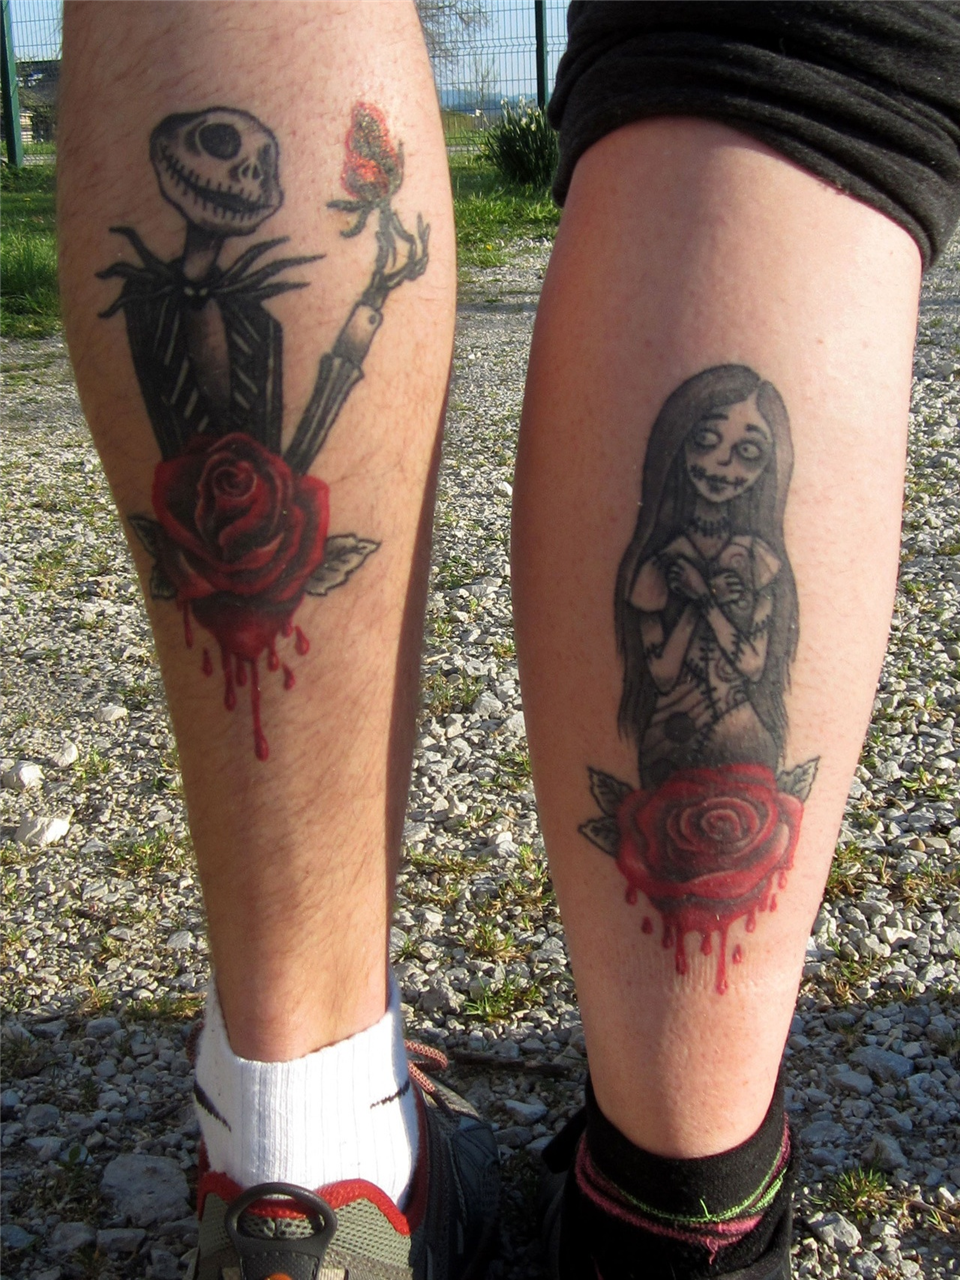 Jack and Sally couple tattoos  Alley Cat Tattoo Studio  Facebook